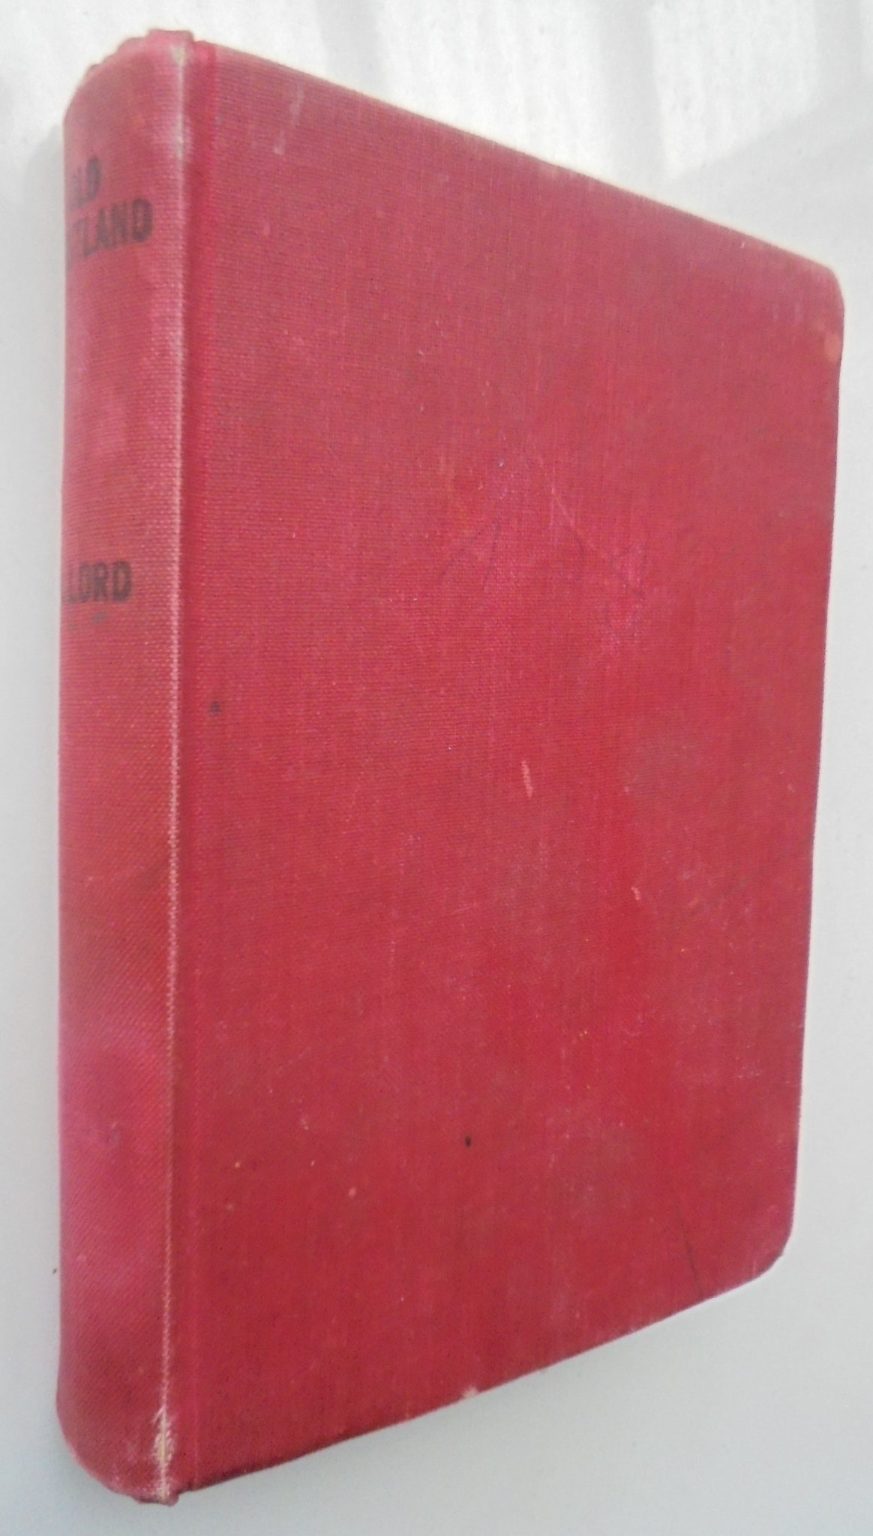 Old Westland by E Iveagh Lord. (1940) First Edition